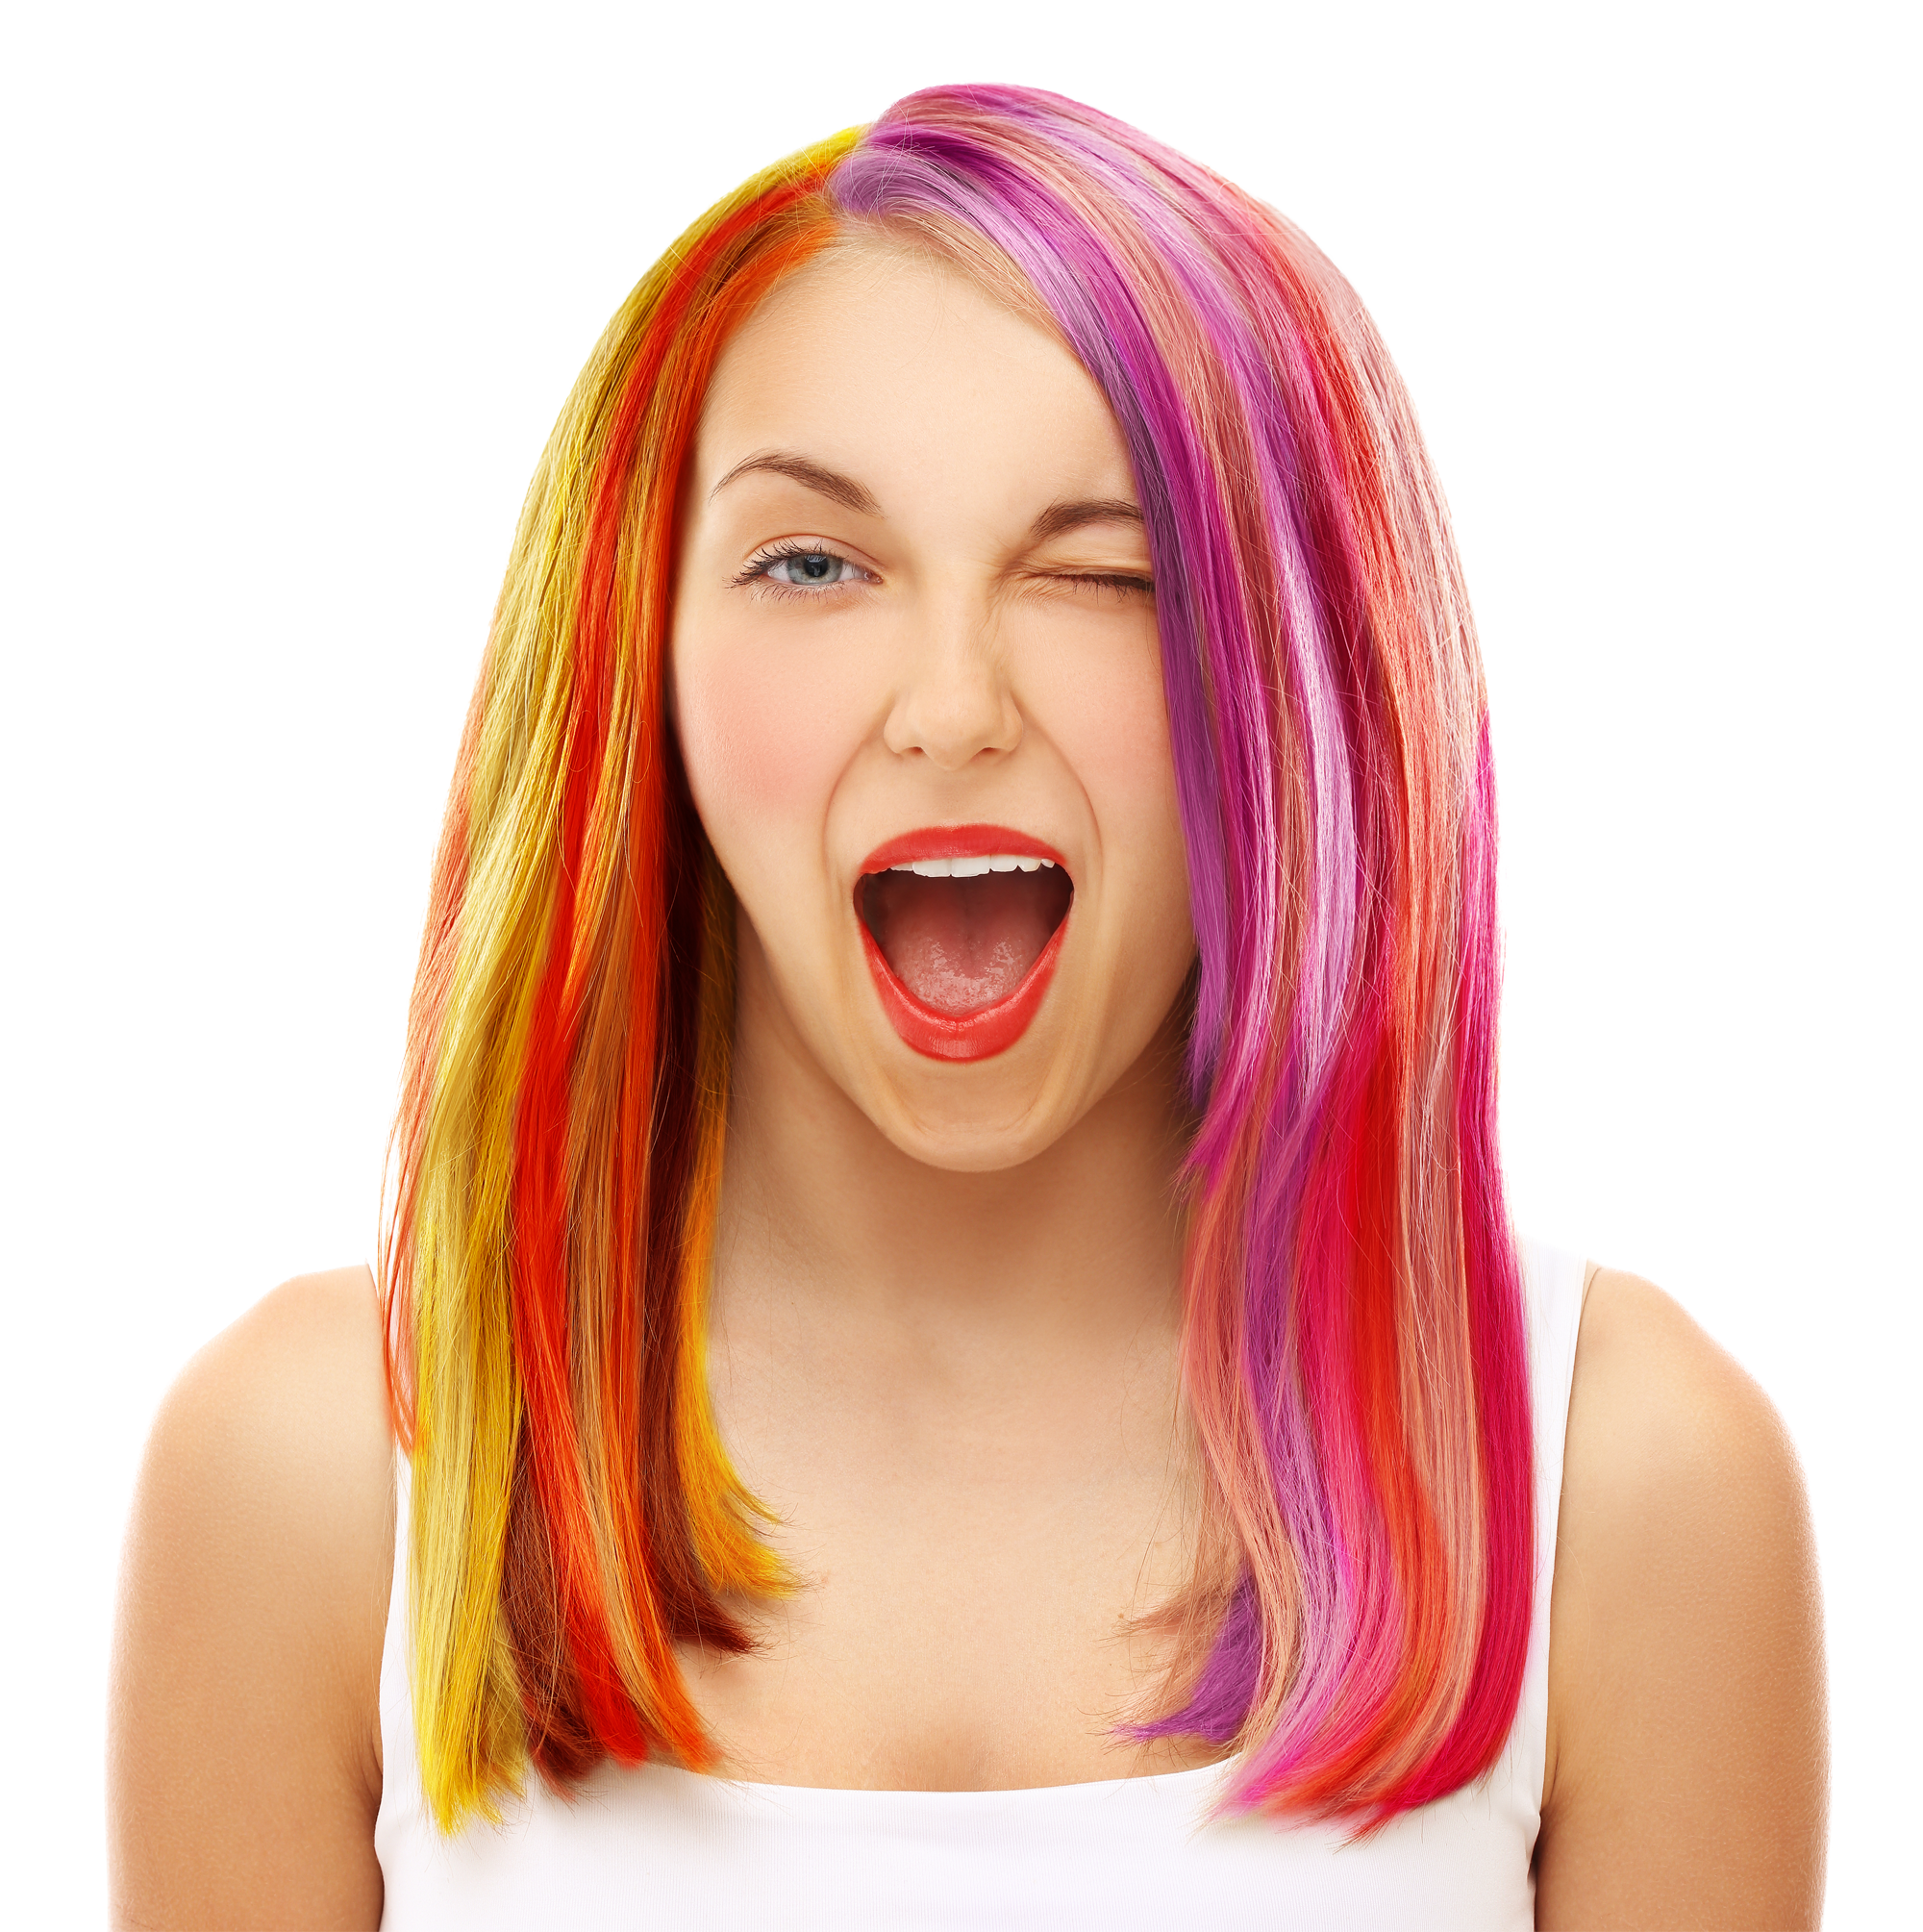 A girl with bright colorful hair winking